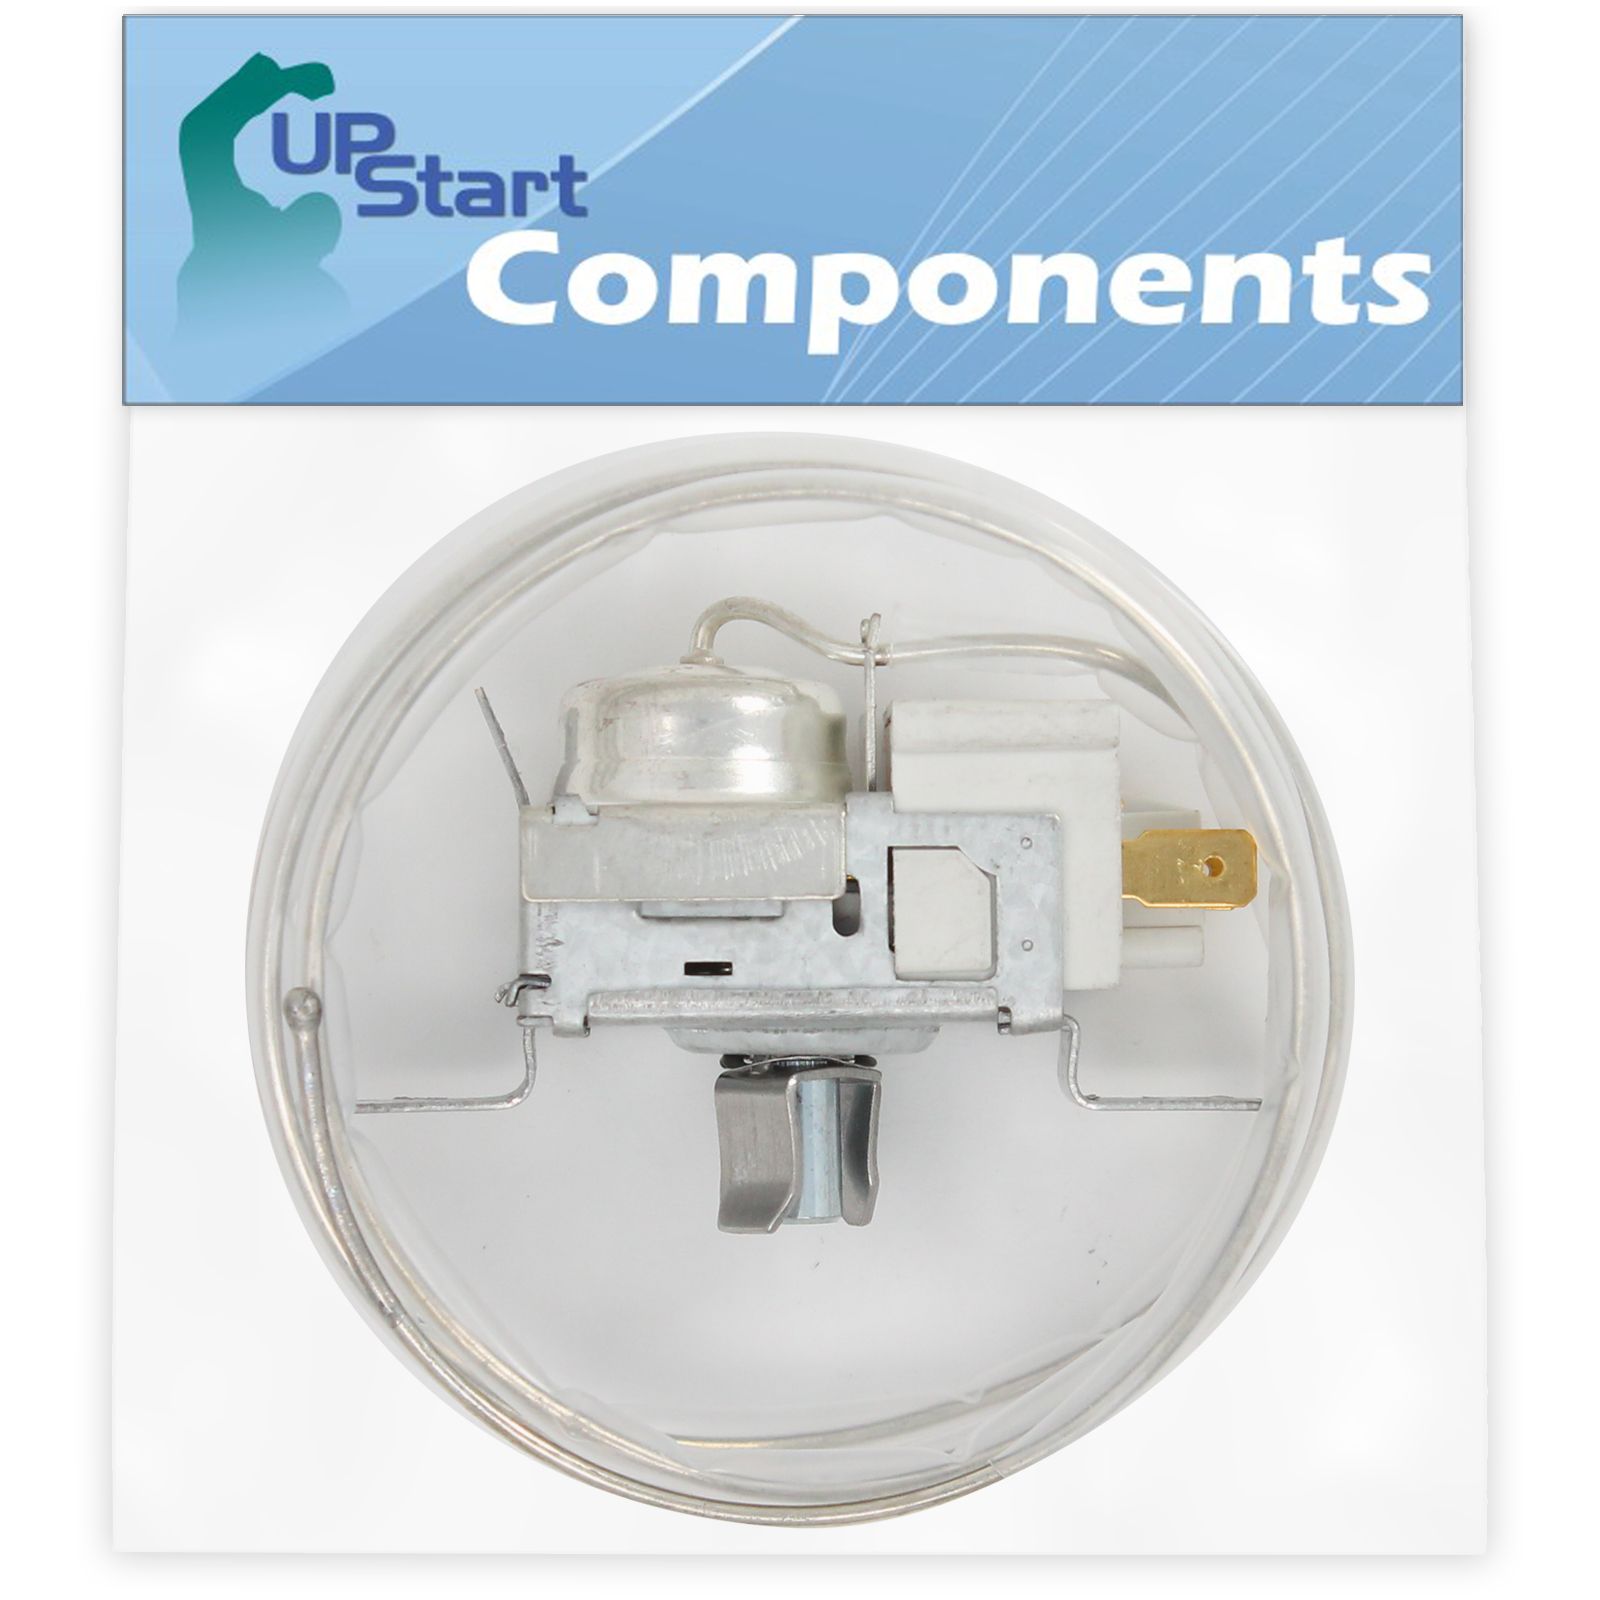 2198202 Cold Control Thermostat Replacement for Whirlpool ED20PKXAN00 Refrigerator - Compatible with WP2198202 Refrigerator Temperature Control Thermostat - UpStart Components Brand - image 1 of 3